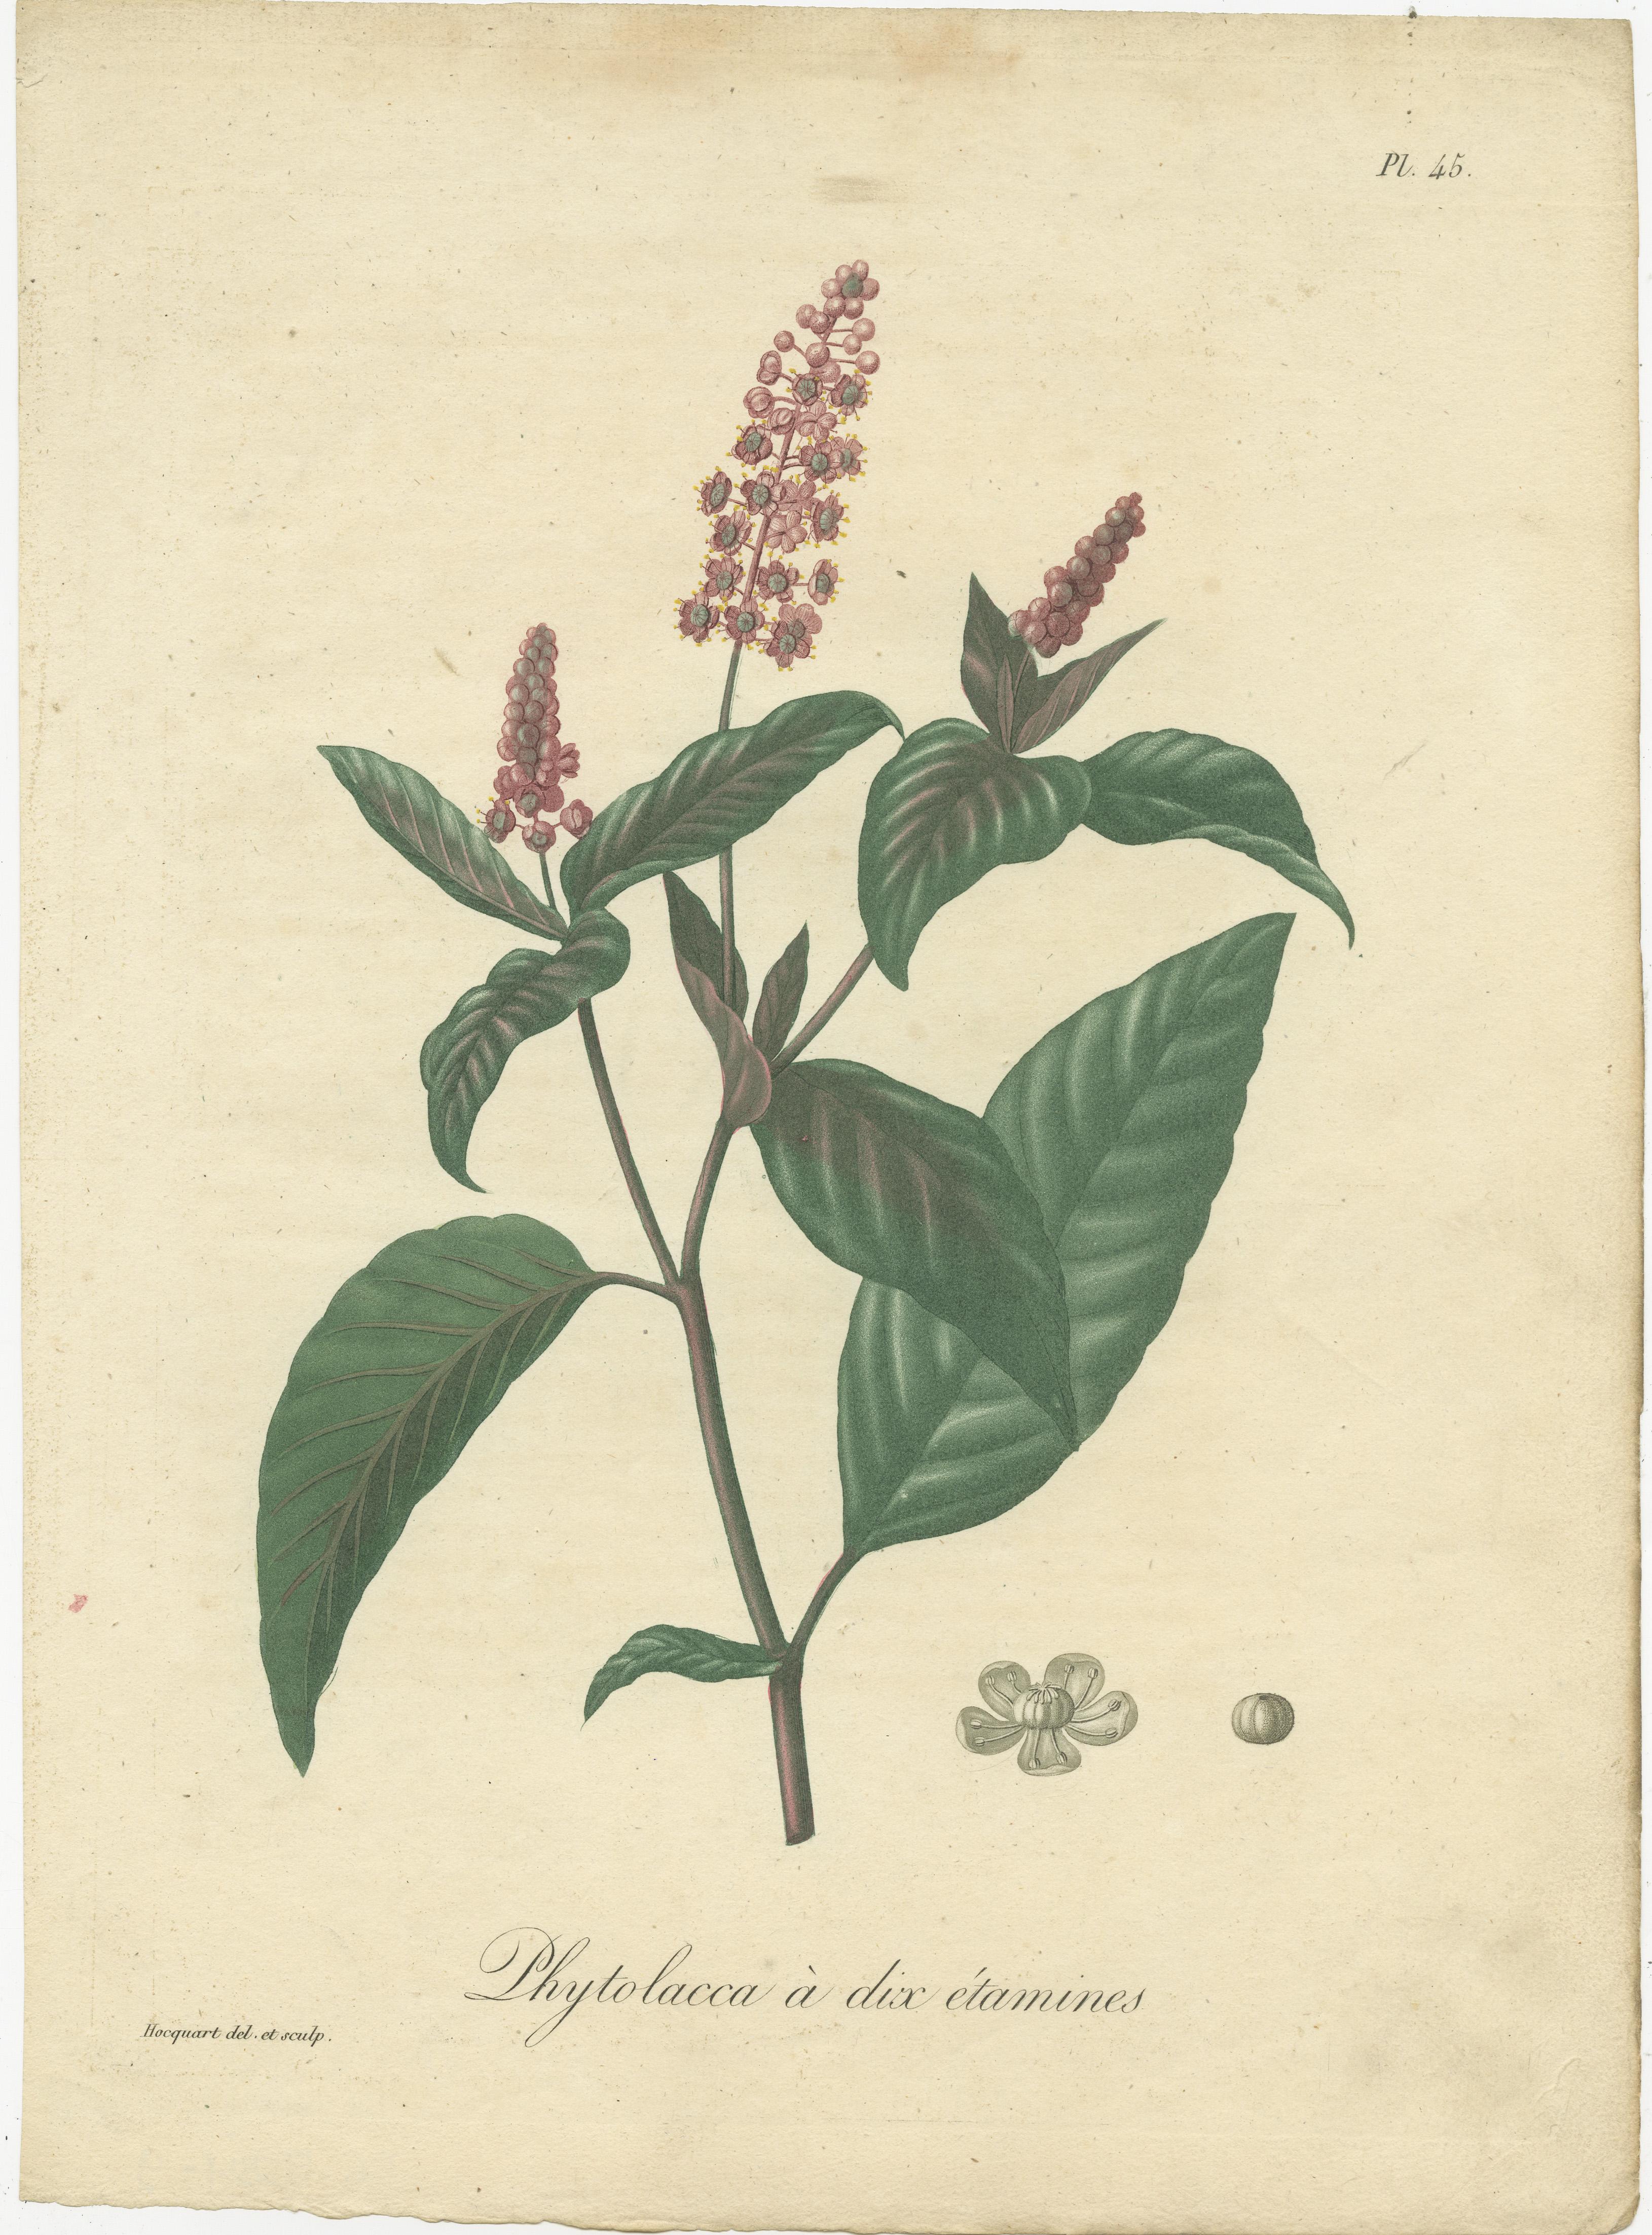 Antique botanical print titled 'Phytolacca à dix étamines'. This print shows the Phytolacca Americana, also known as American pokeweed, pokeweed, poke sallet, pokeberry, dragonberries, and inkberry. It is a poisonous, herbaceous perennial plant in